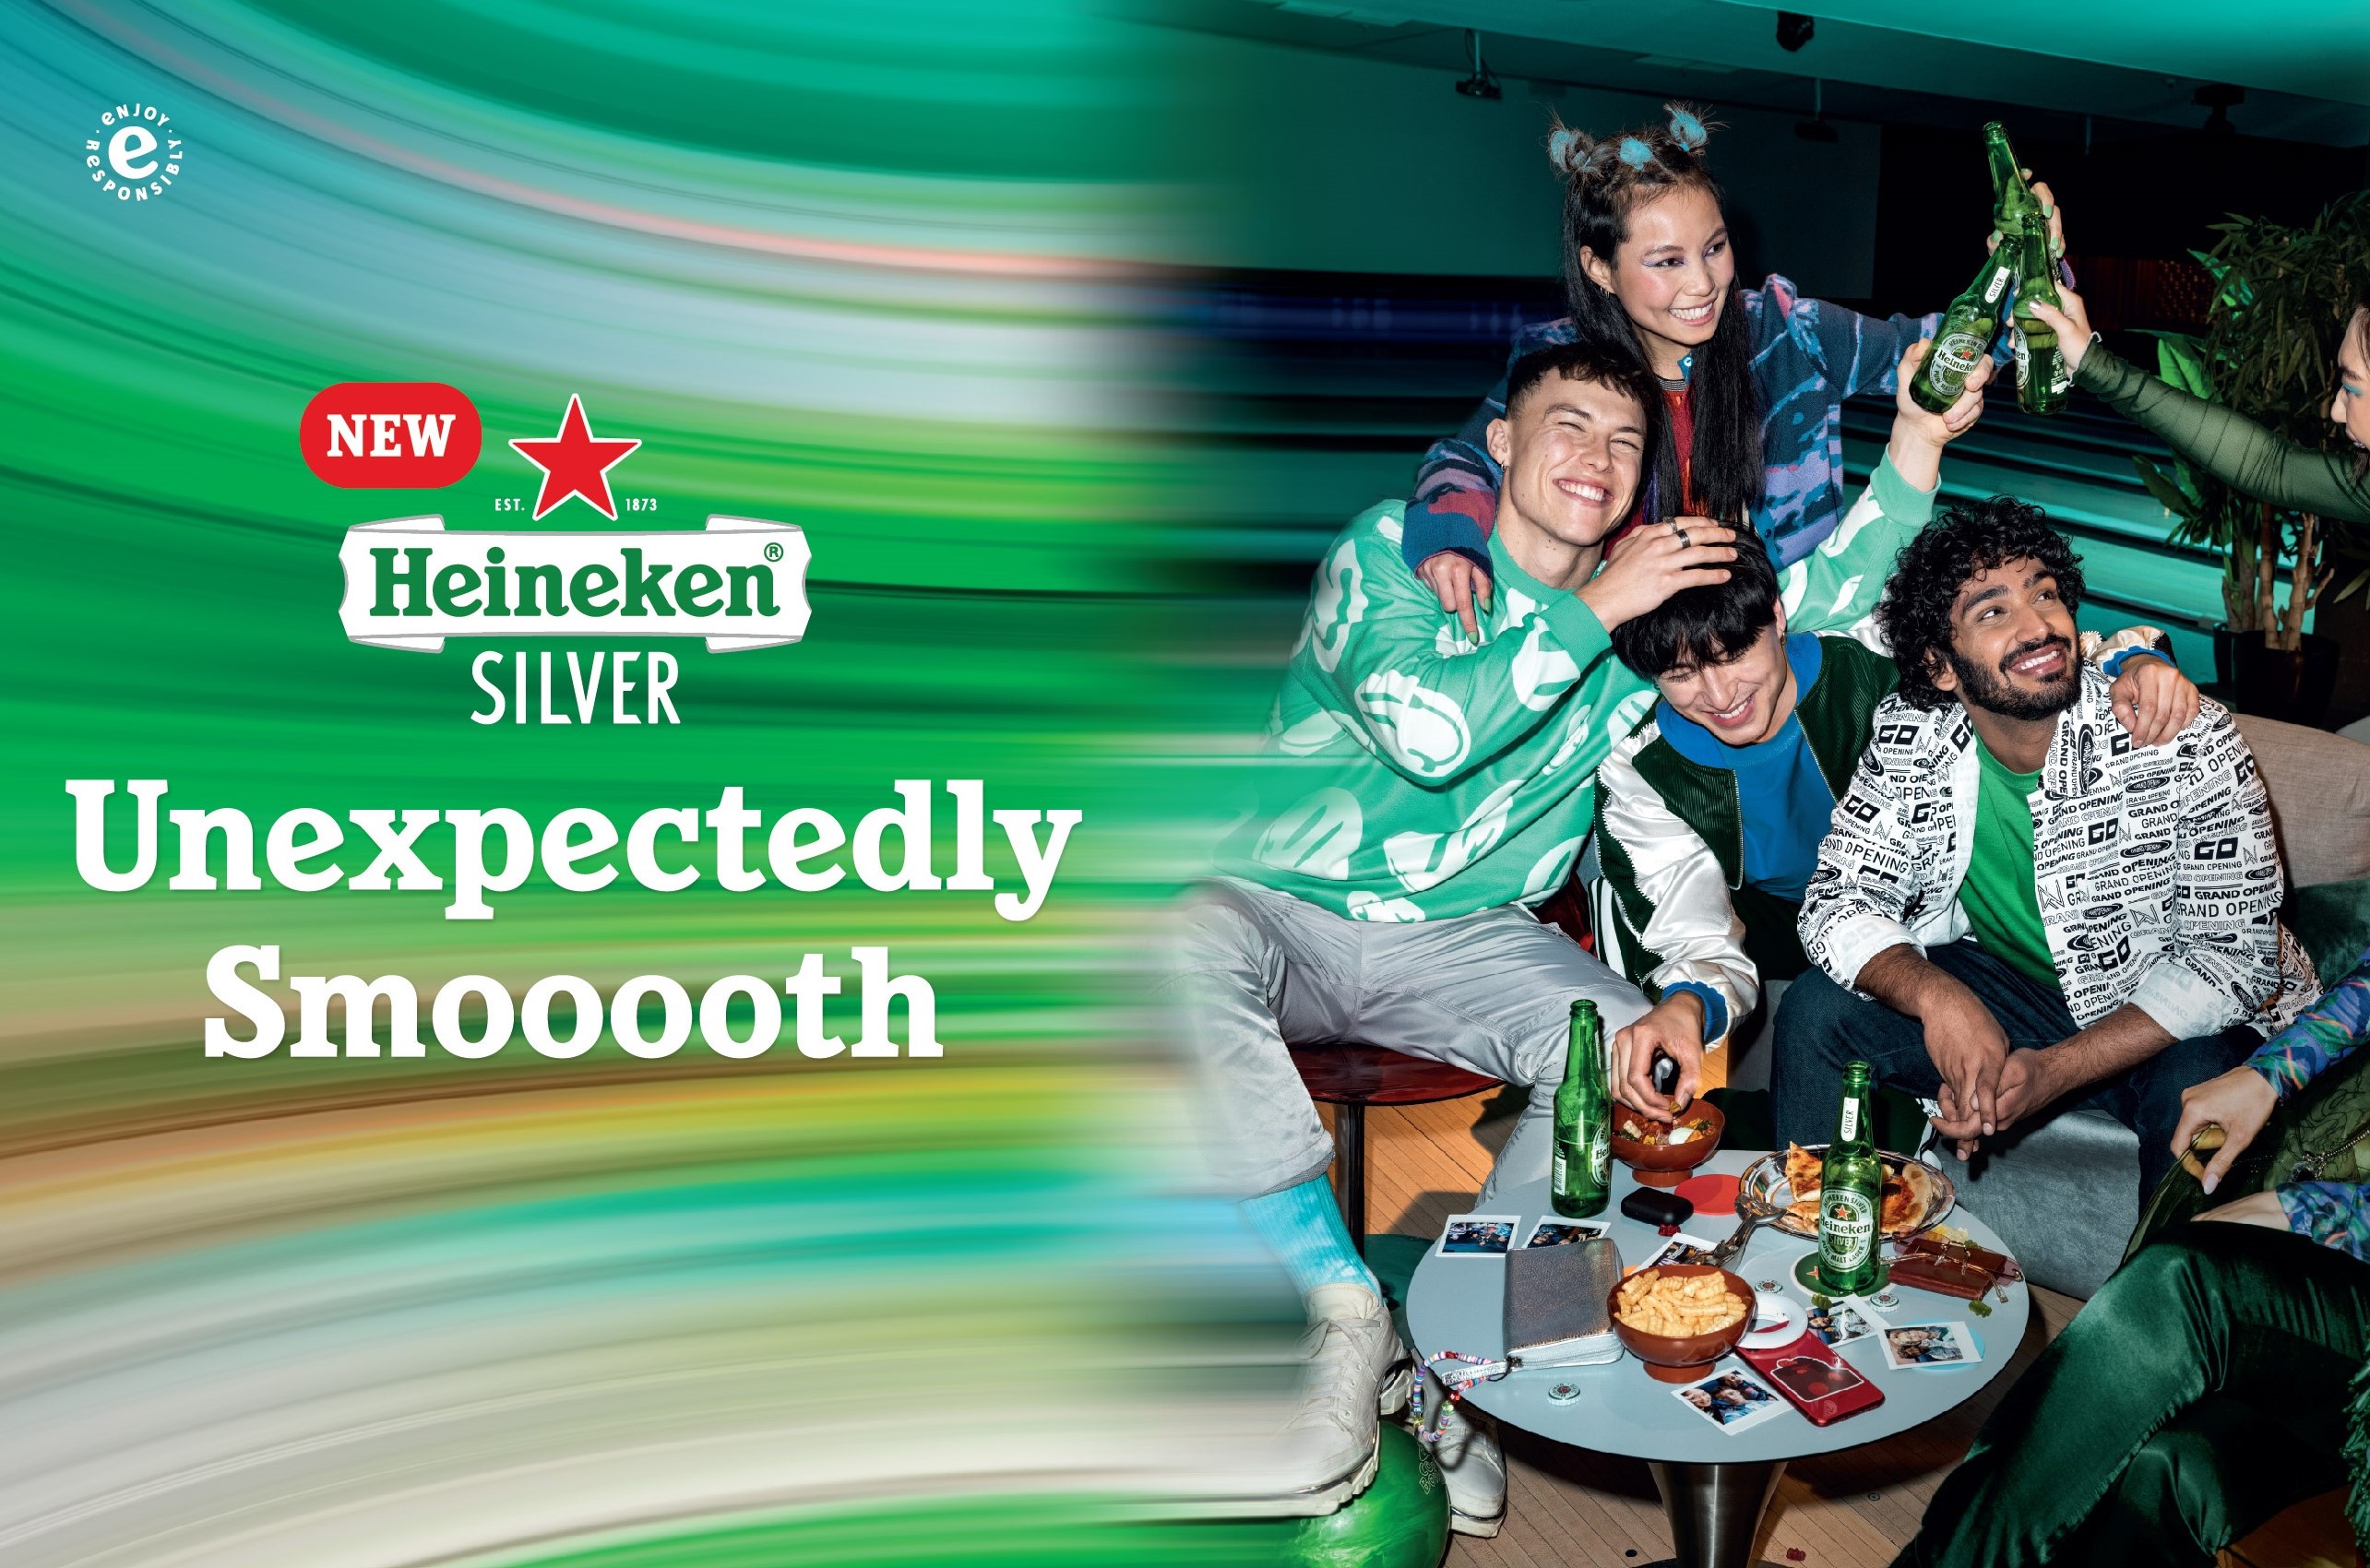 IME FOR SOMETHING UNEXPECTEDLY SMOOTH   UNITED BREWERIES LAUNCHES NEW HEINEKEN® SILVER IN INDIA